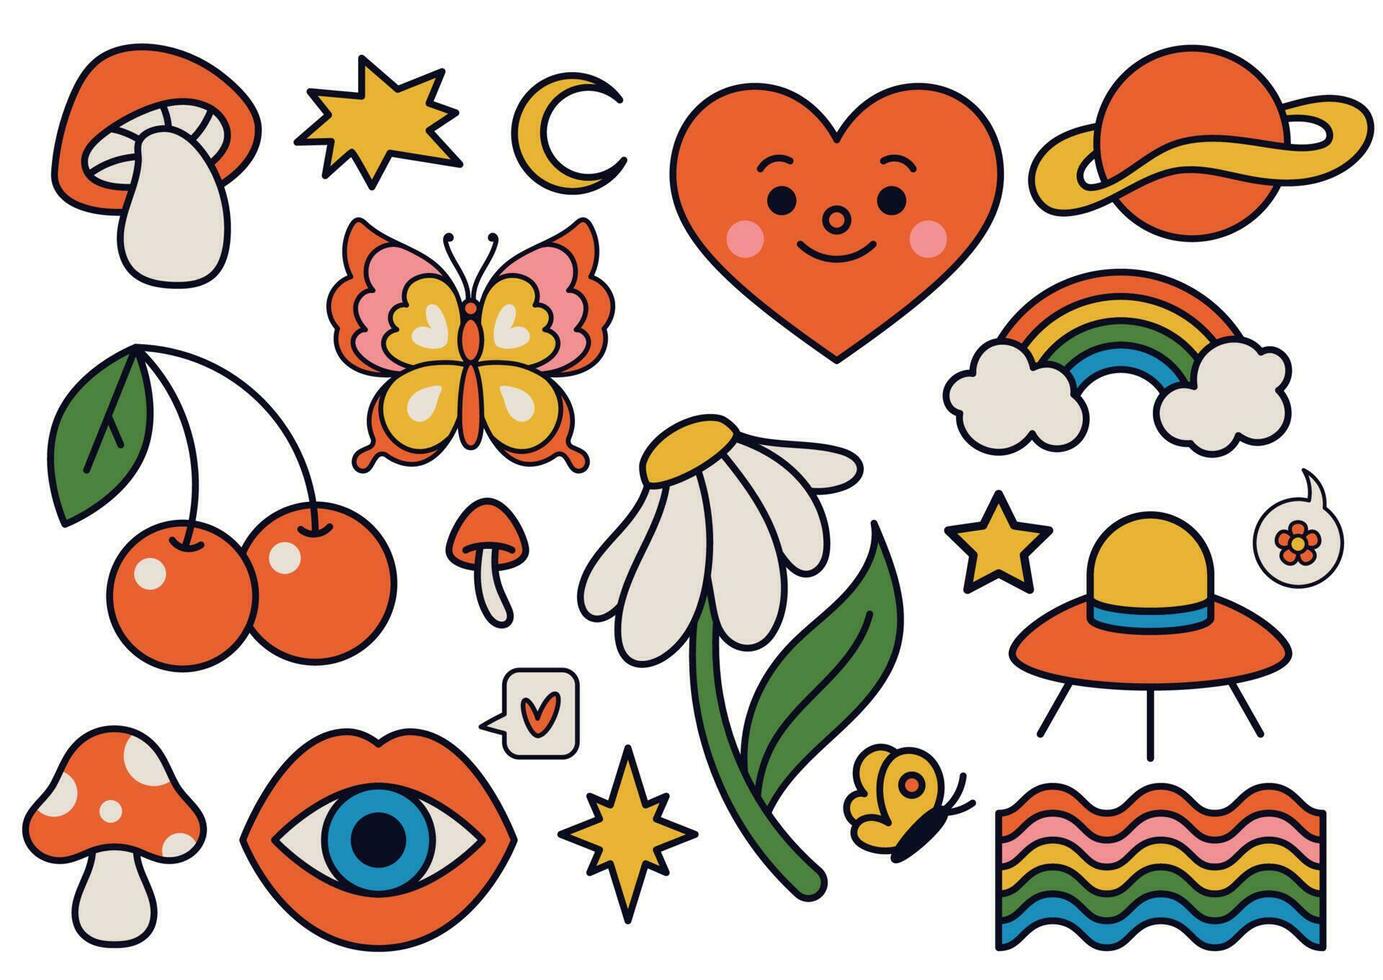 Cute funky hippy stickers. Retro 70s vibe, psychedelic groovy elements as mushroom, flower, rainbow and ufo vector